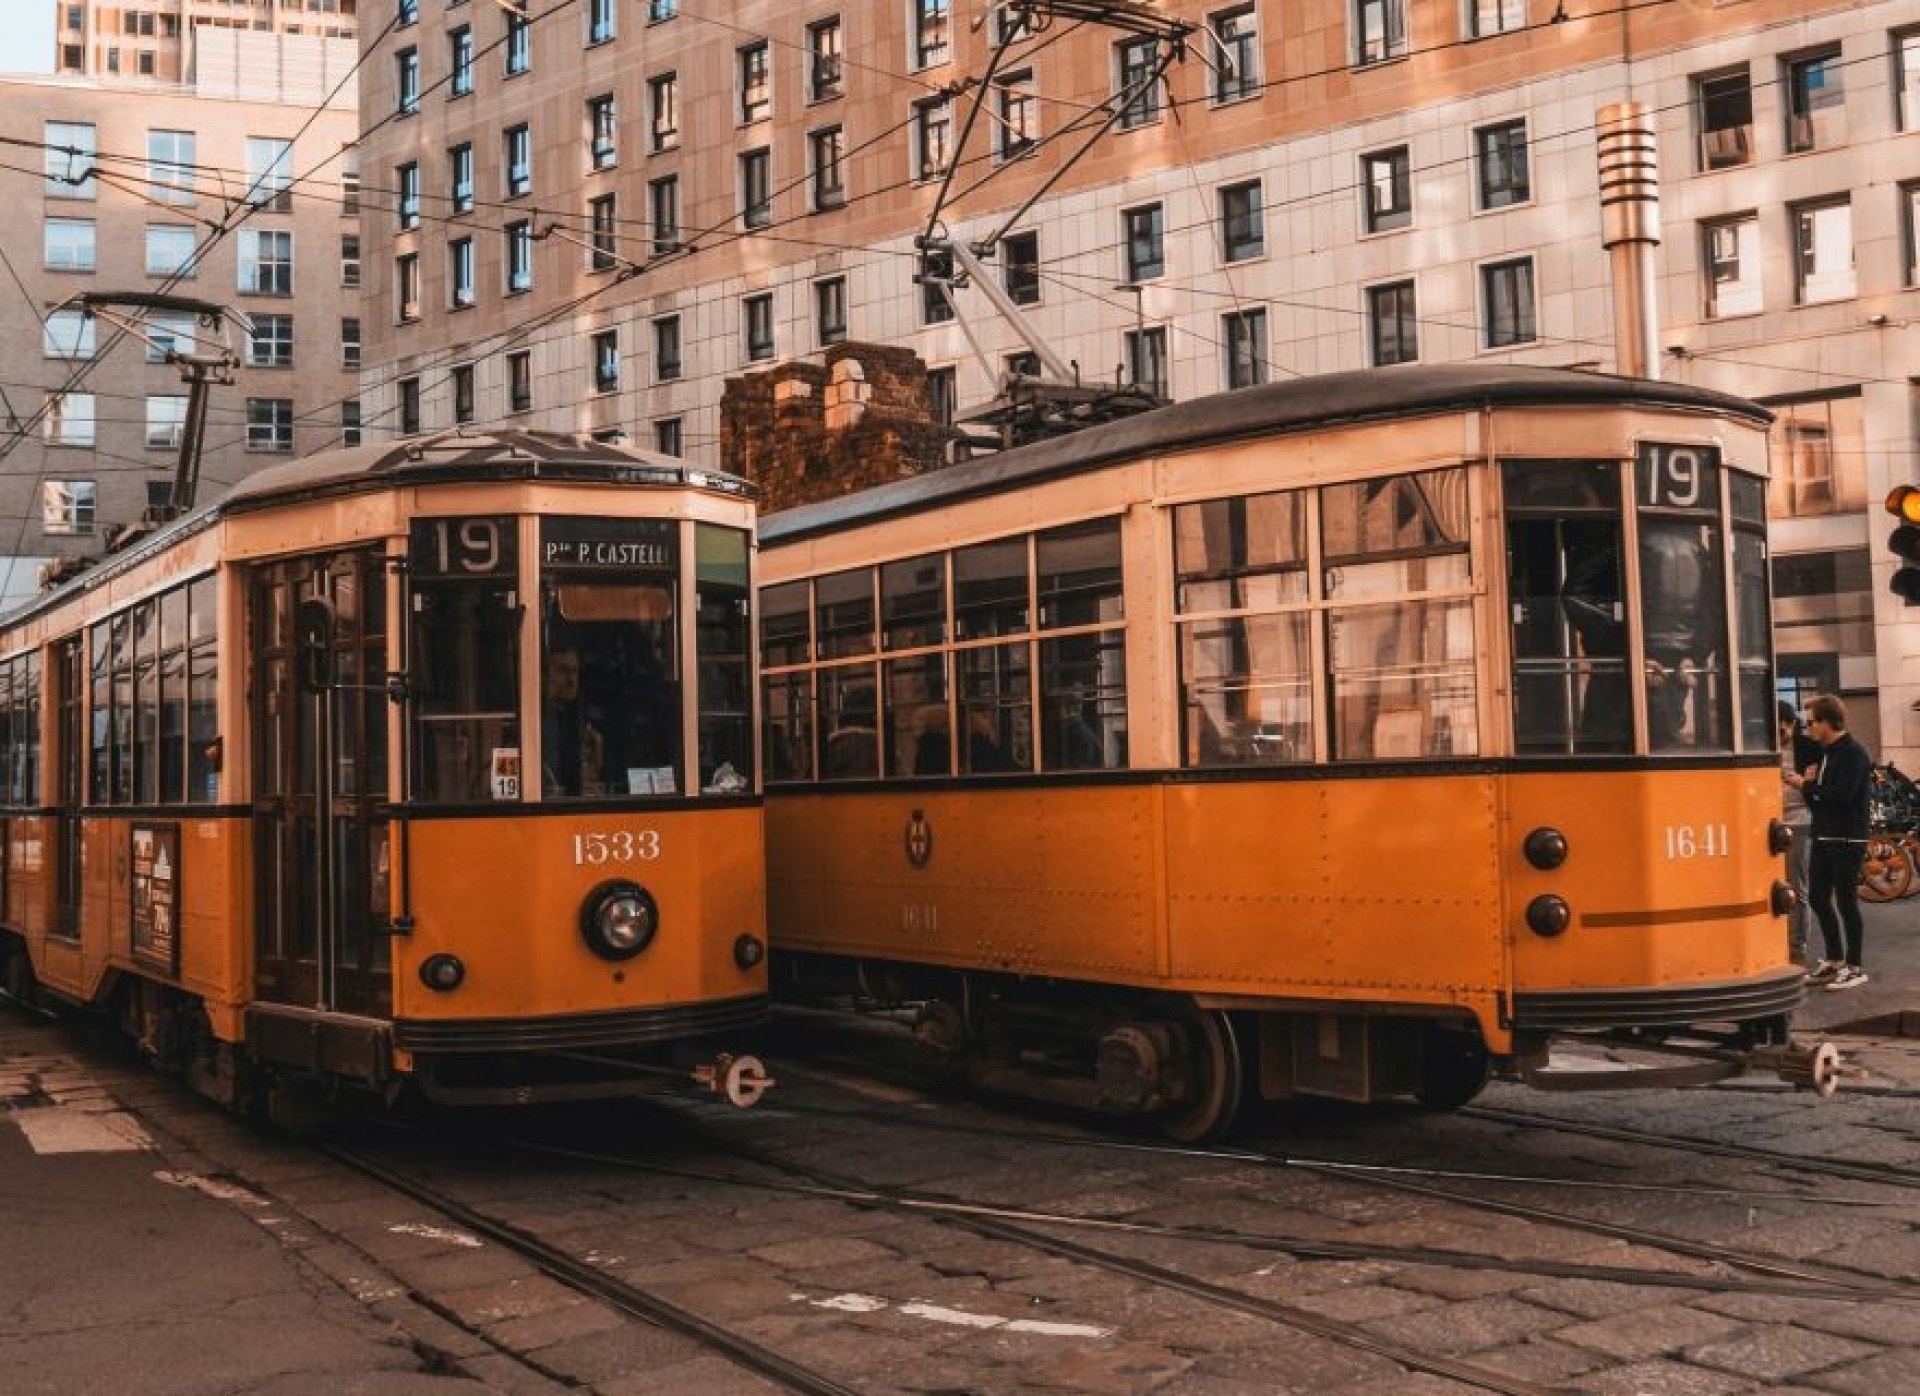 Guided Historic Tram Tour